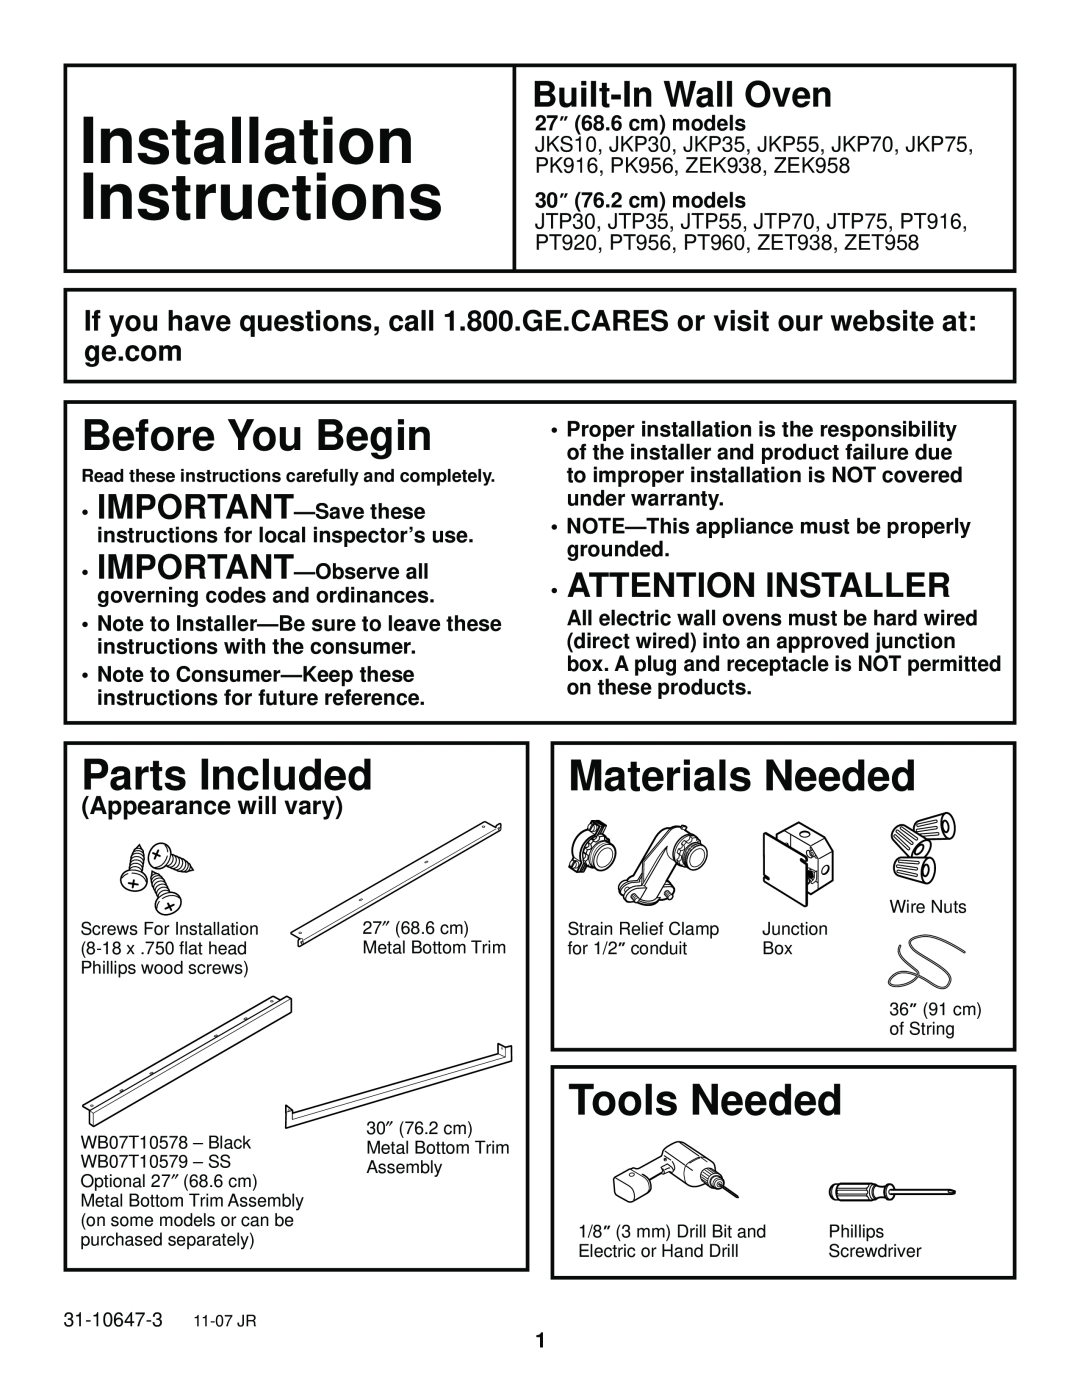 GE r08654v-1 installation instructions Installation, Instructions, Before You Begin, Parts Included, Materials Needed 